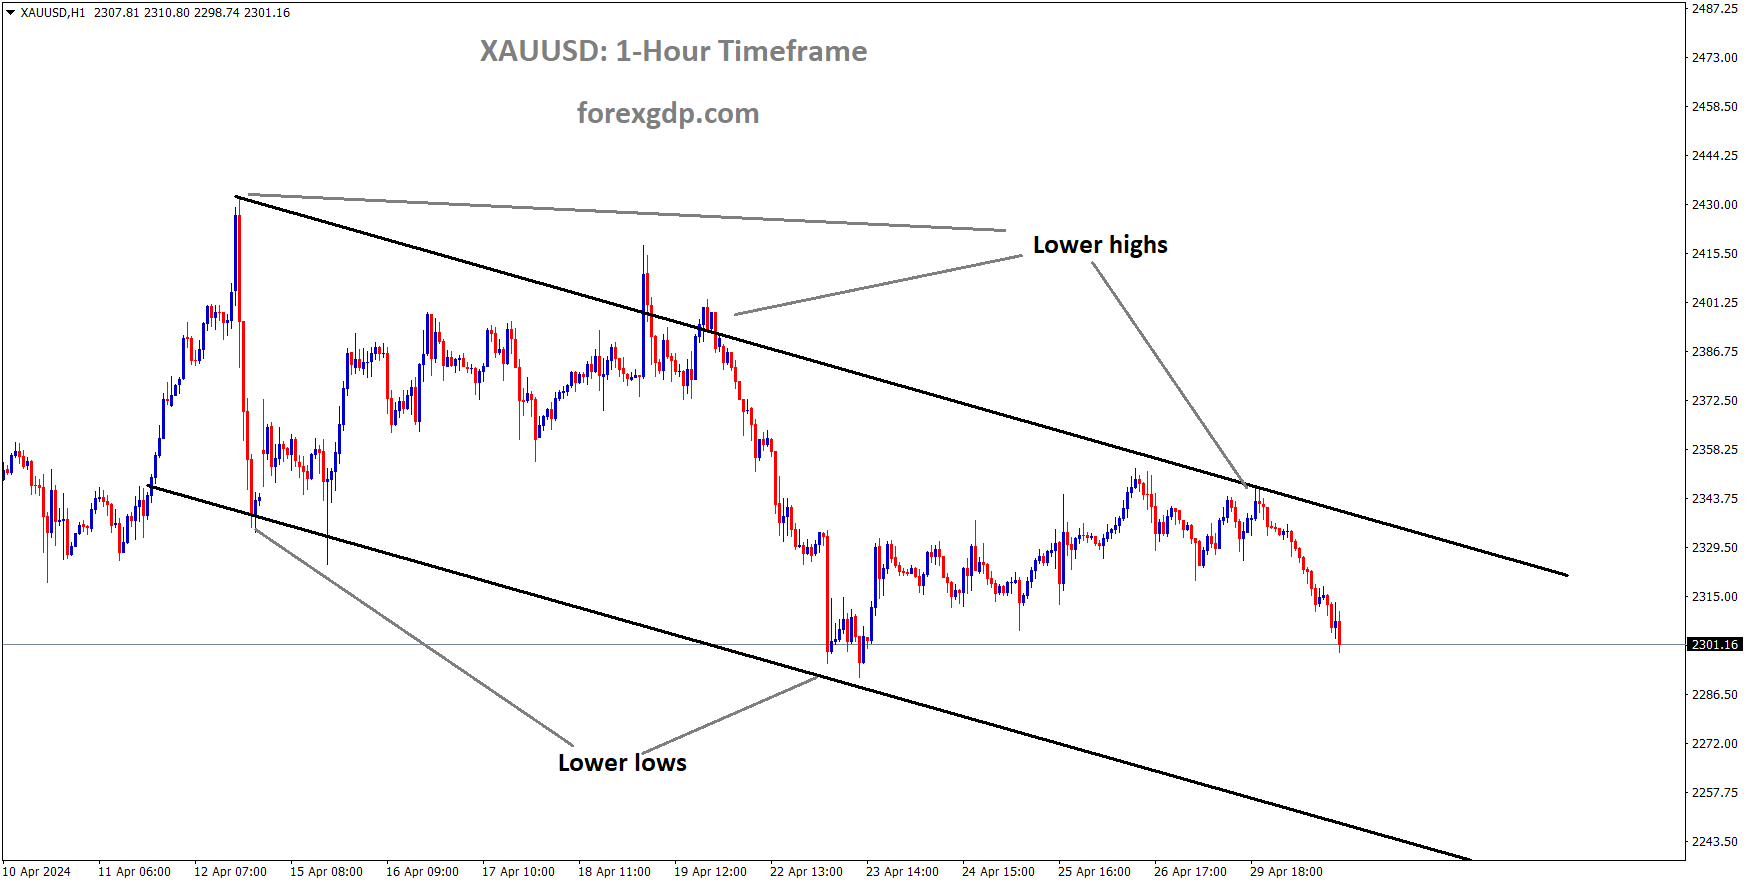 XAUUSD is moving in Descending channel and market has fallen from the lower high area of the channel